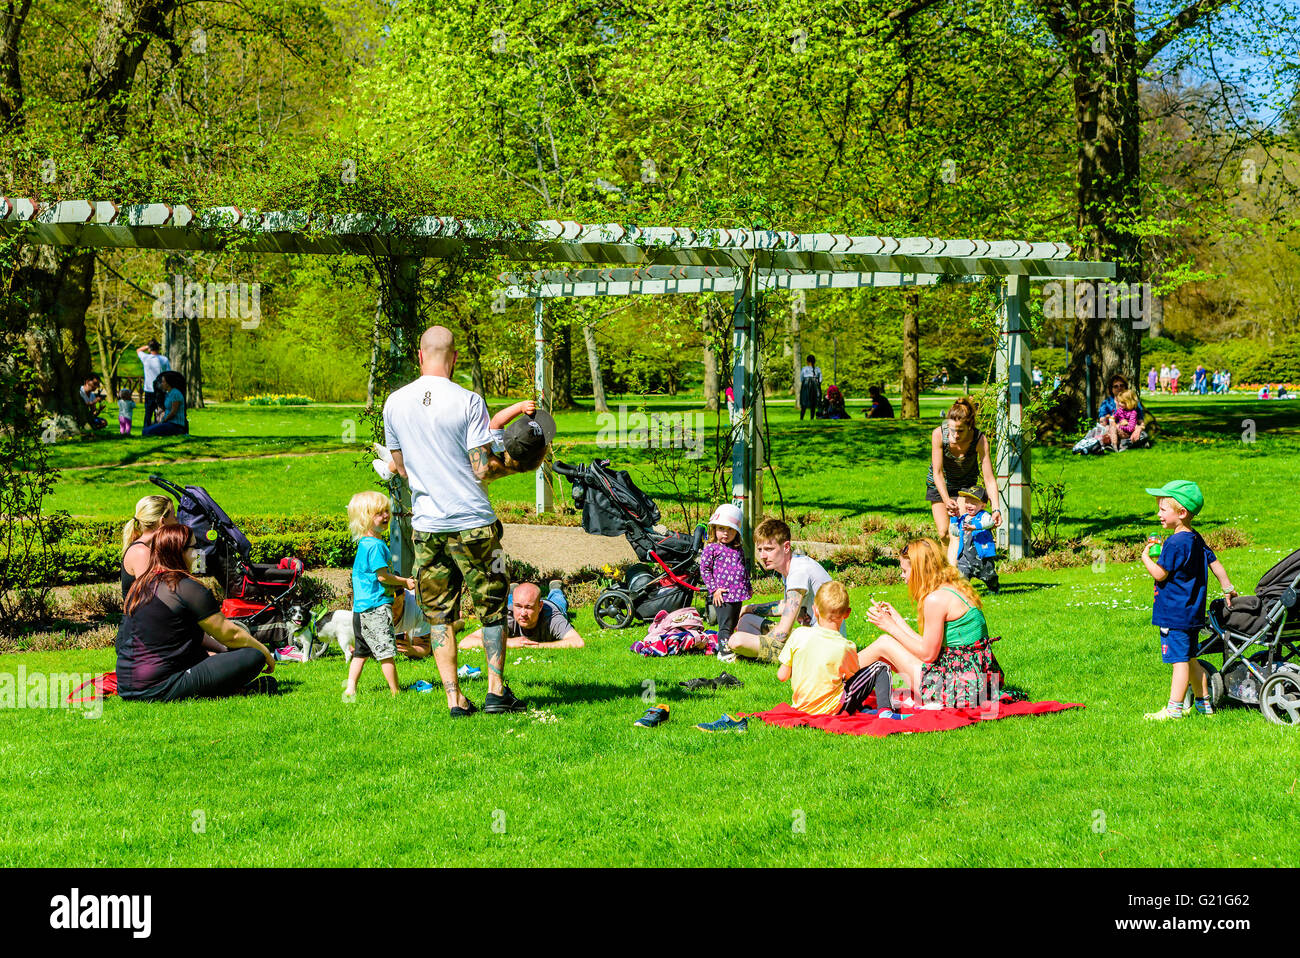 Ronneby, Sweden - May 8, 2016: People enjoying the fine weather while relaxing in the park. Young adults and children playing an Stock Photo